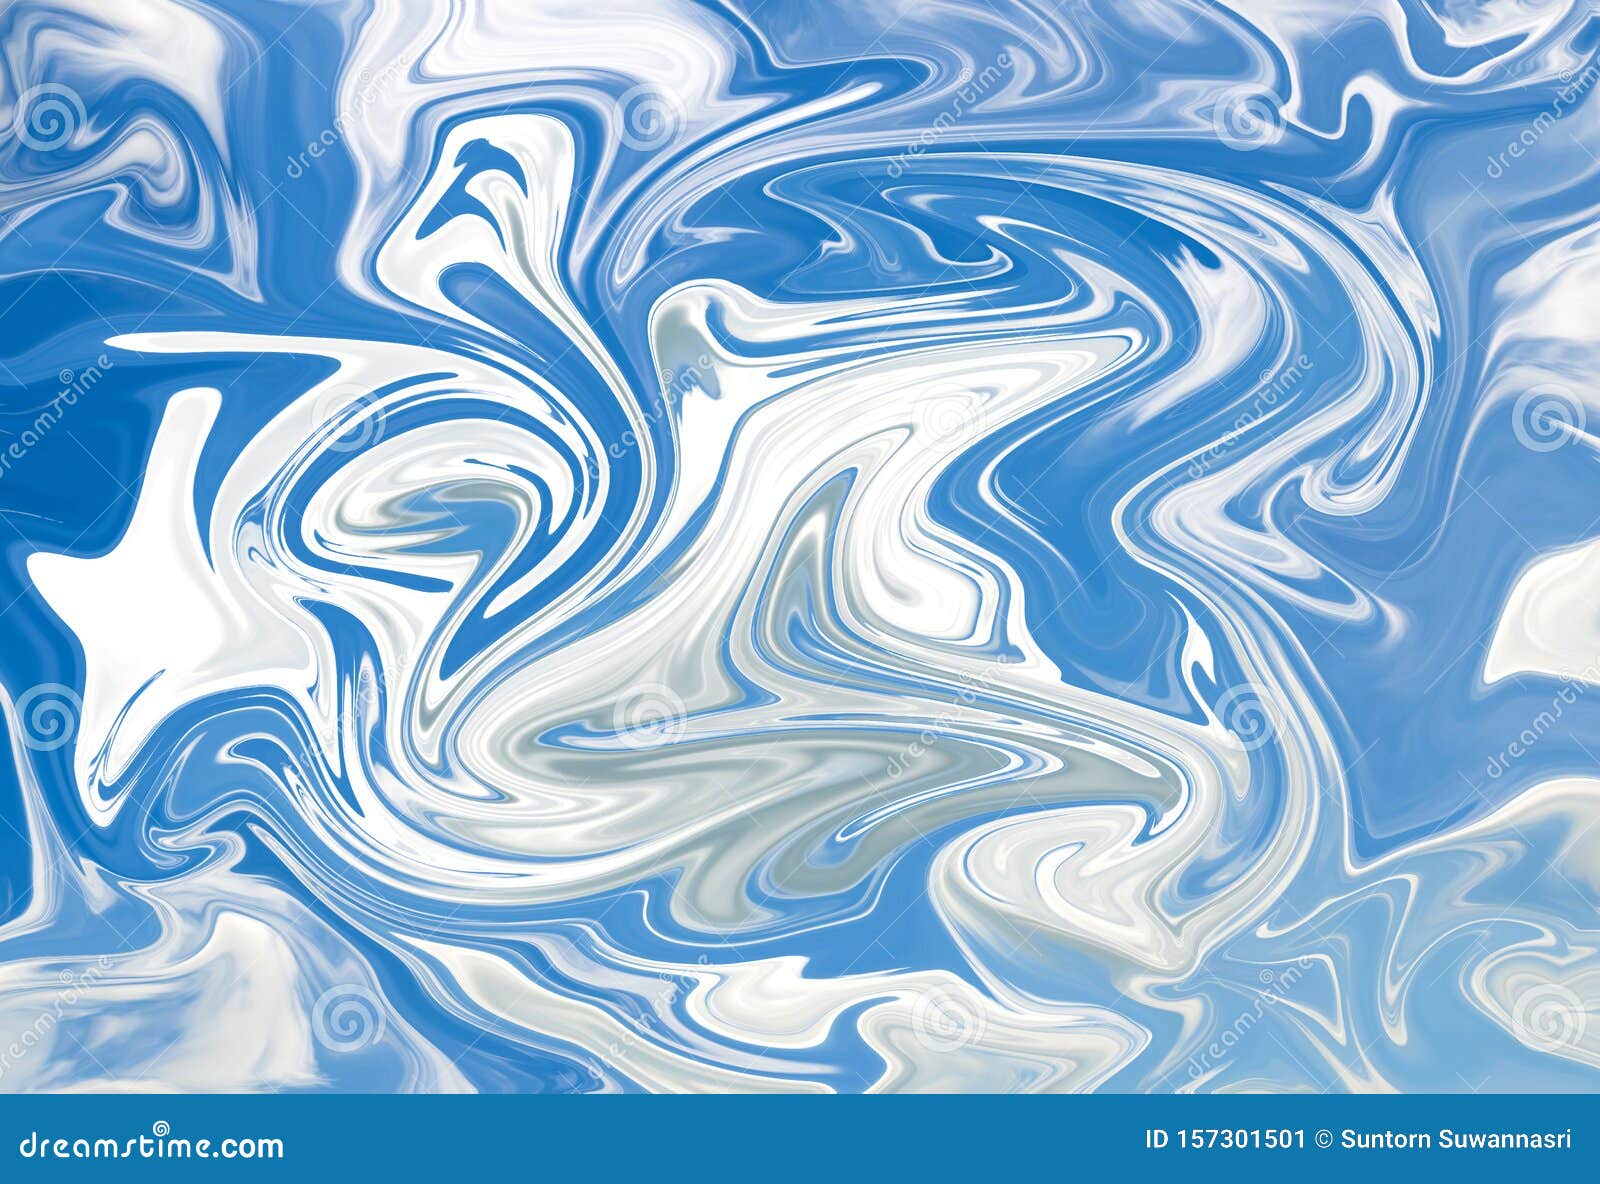 Abstract Beautiful Sky Blue Colour and White Liquid Marble Swirl Texture  Background Stock Image - Image of colour, gold: 157301501